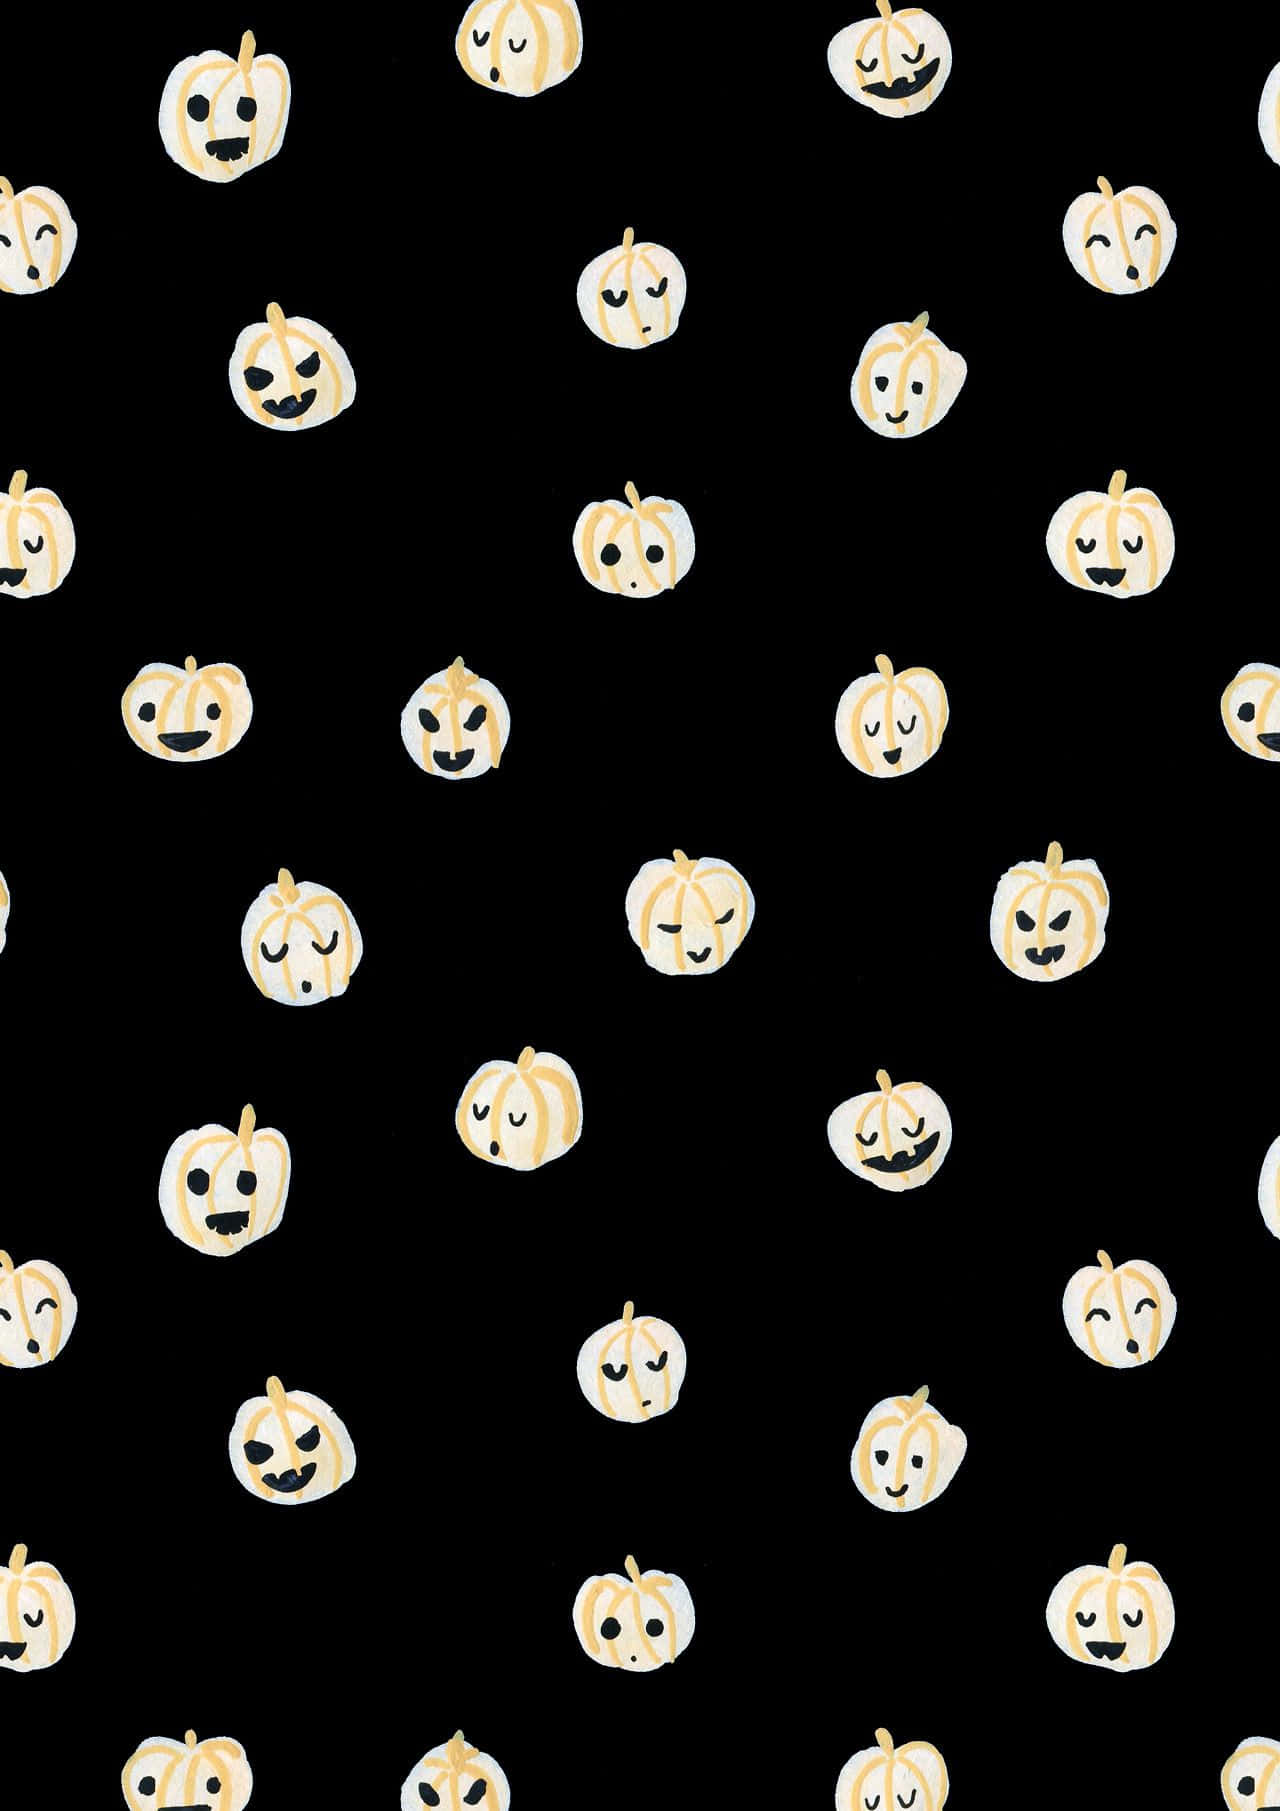 Give your iPhone a spooky upgrade with this 'Cute Pumpkin' wallpaper! Wallpaper